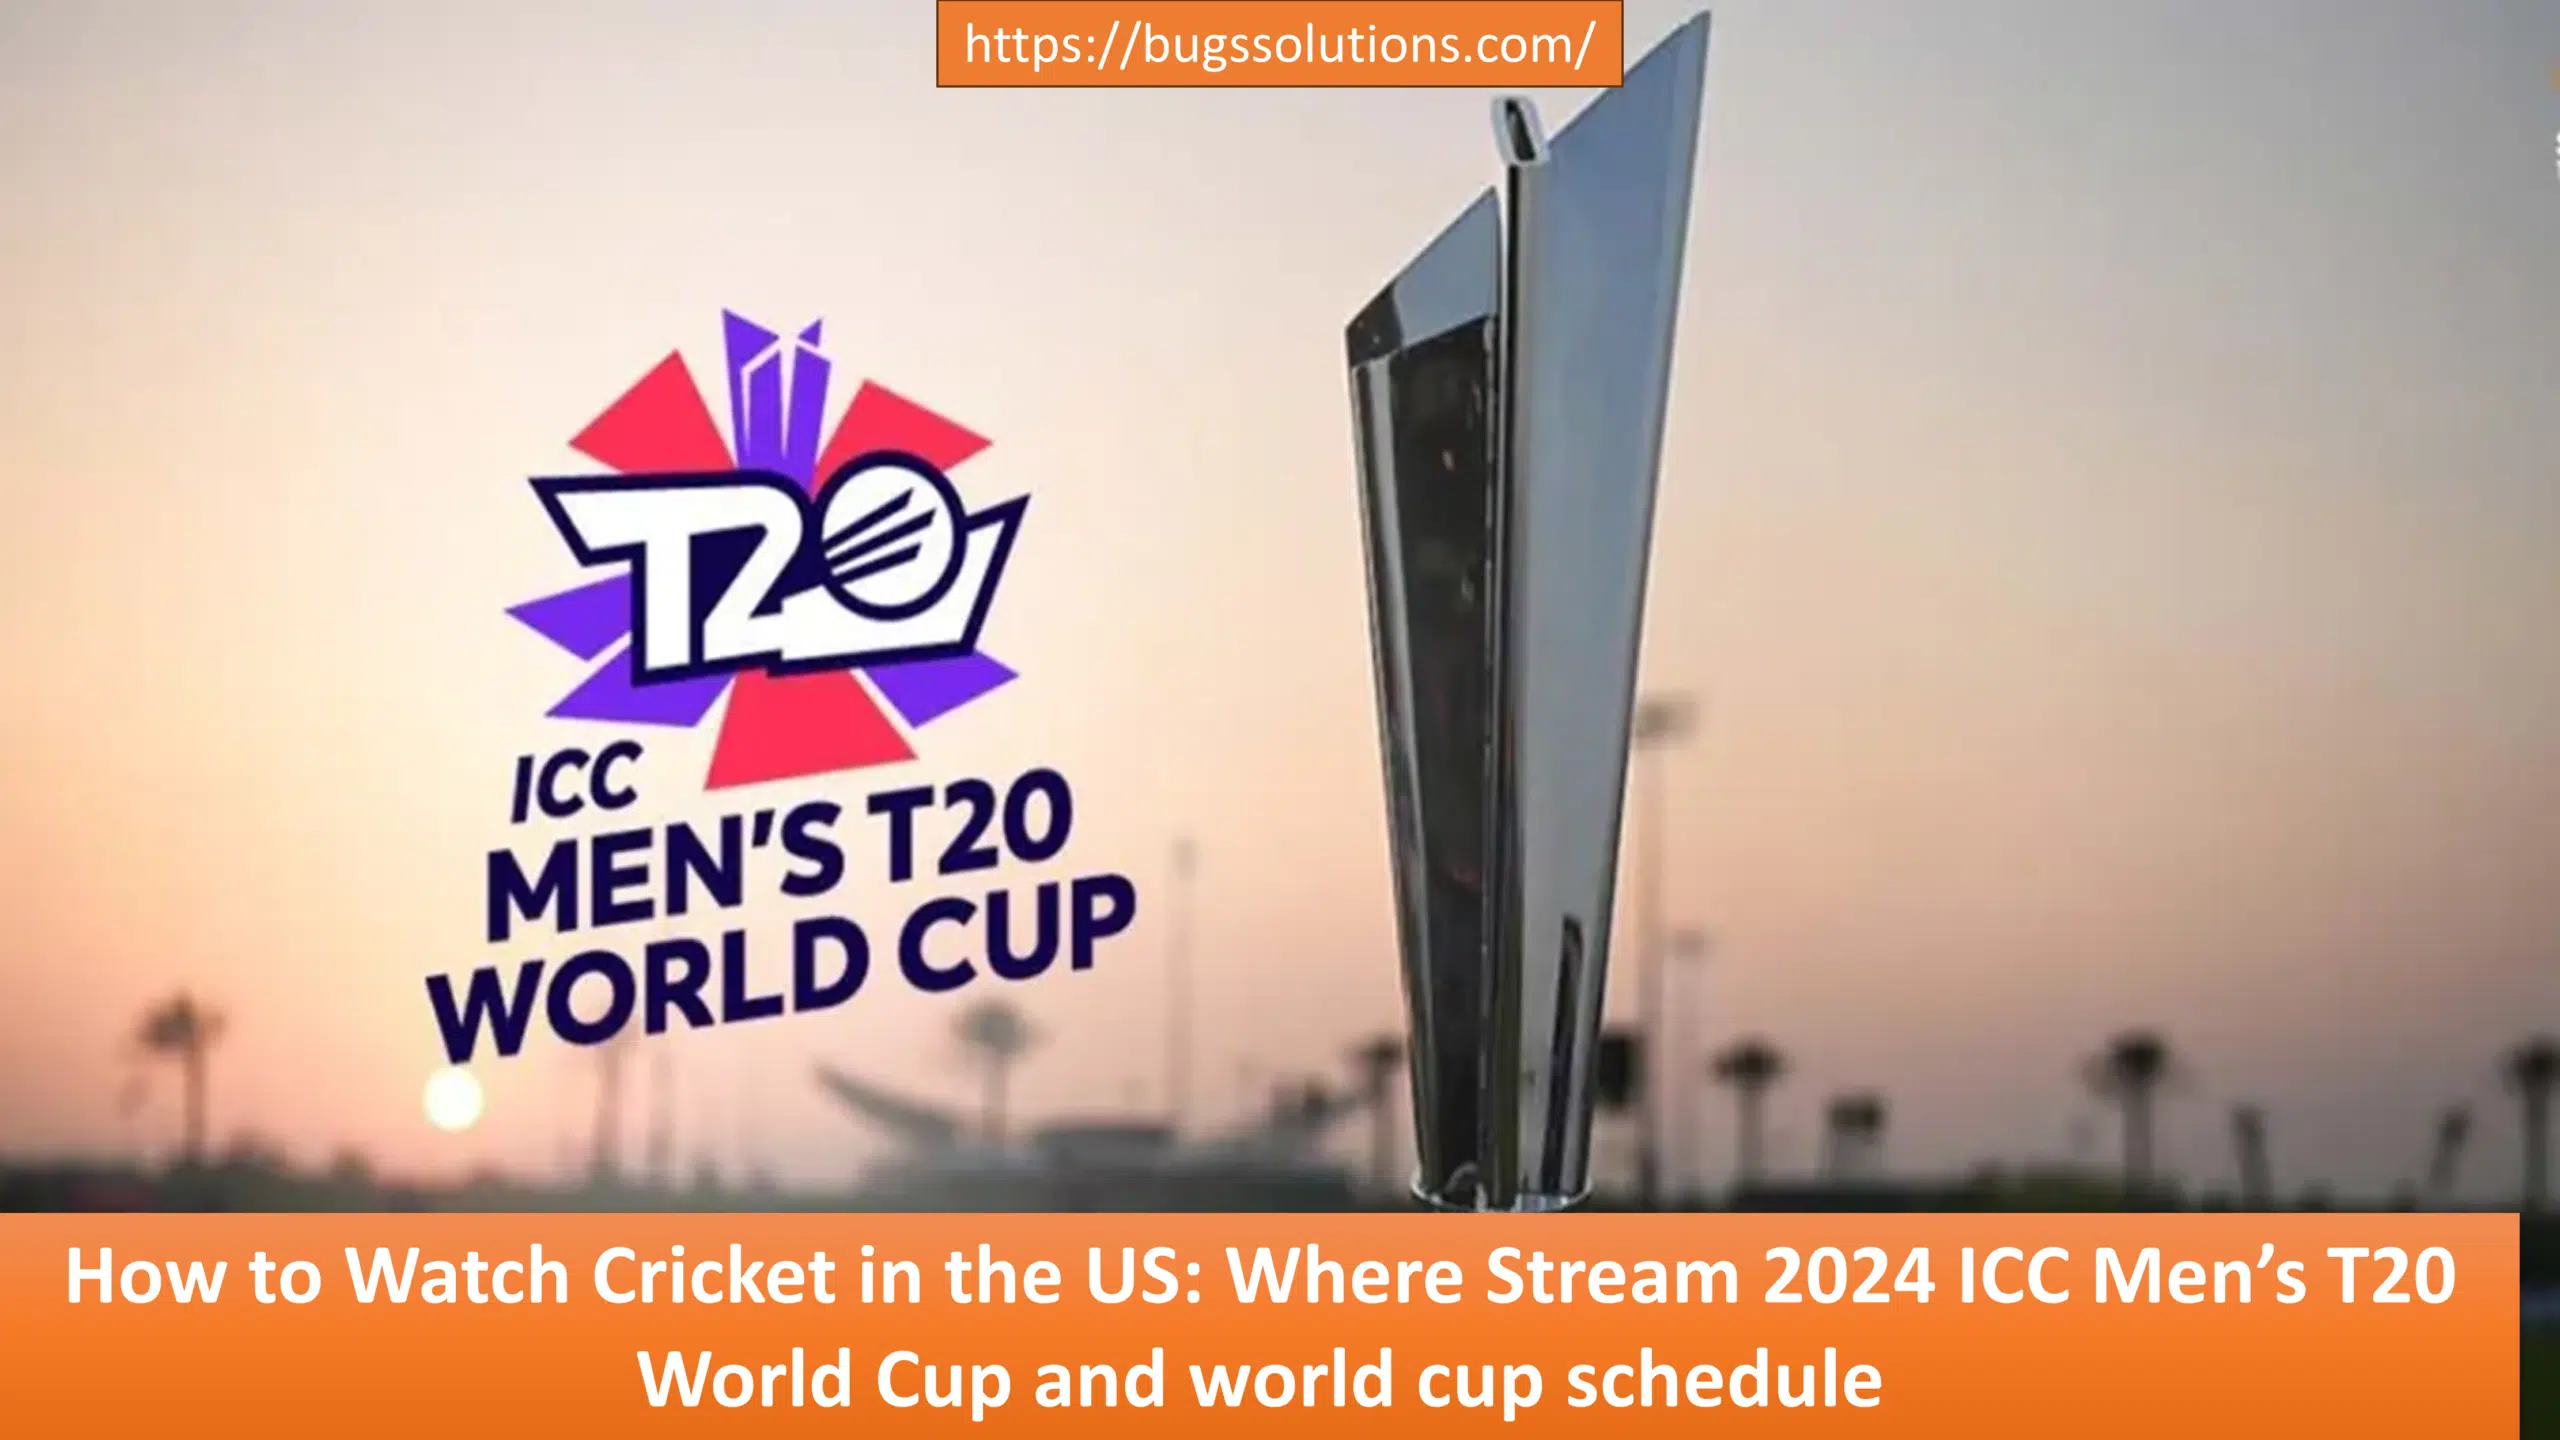 How to Watch Cricket in the US: Where Stream 2024 ICC Men’s T20 World Cup and world cup schedule